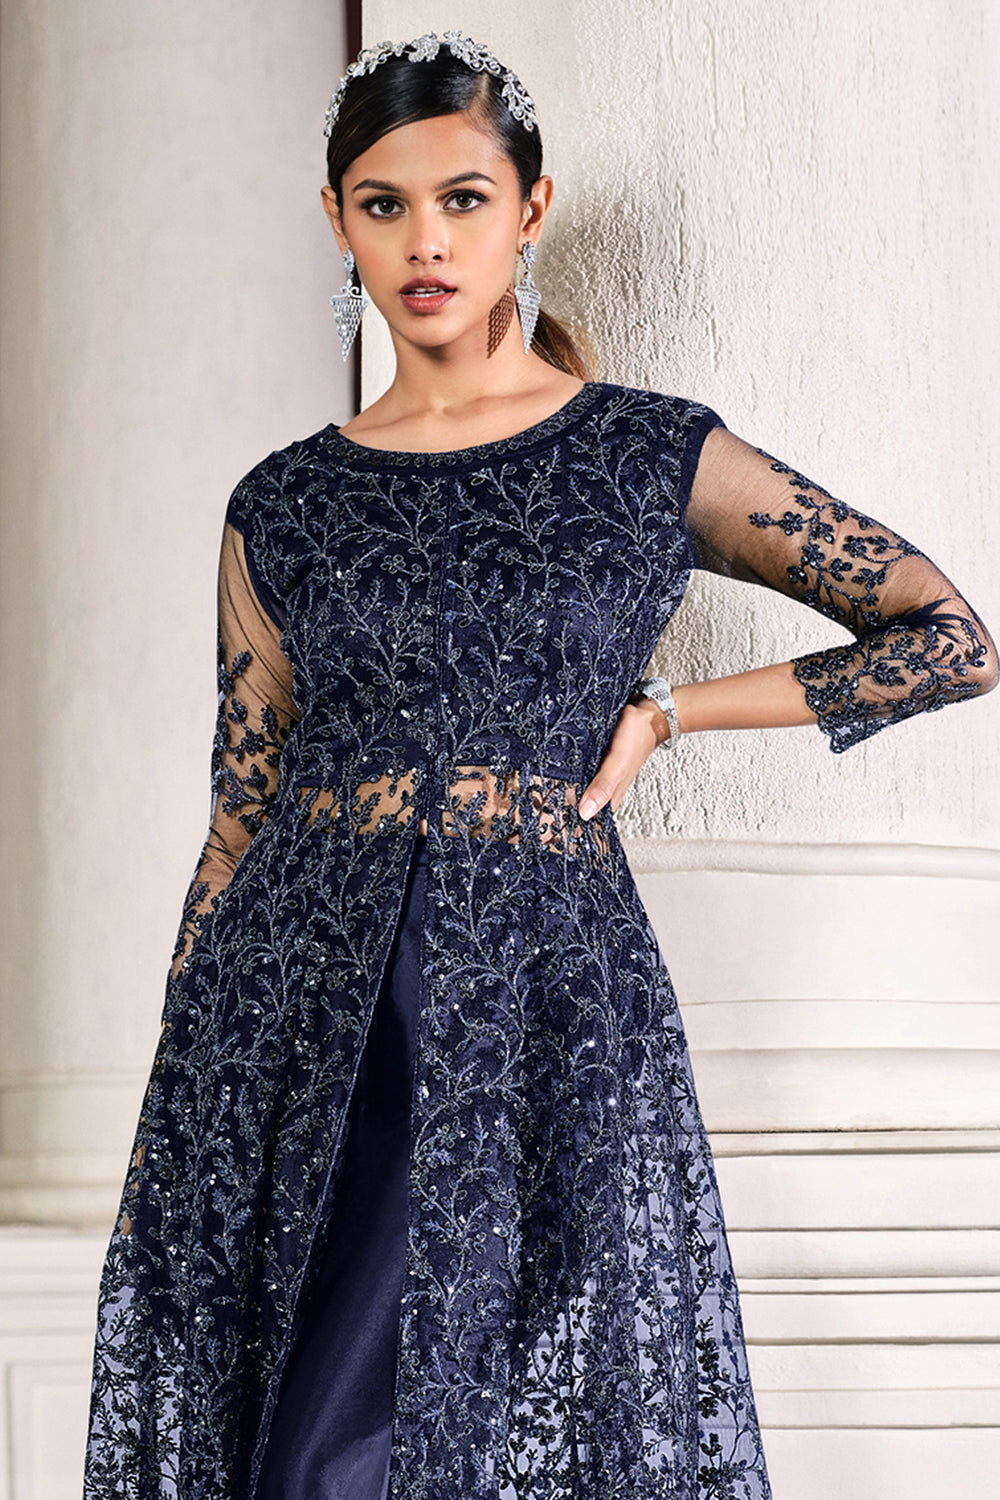 Party Wear Suits - Buy Party Wear Suit Online at DiwaliStyle